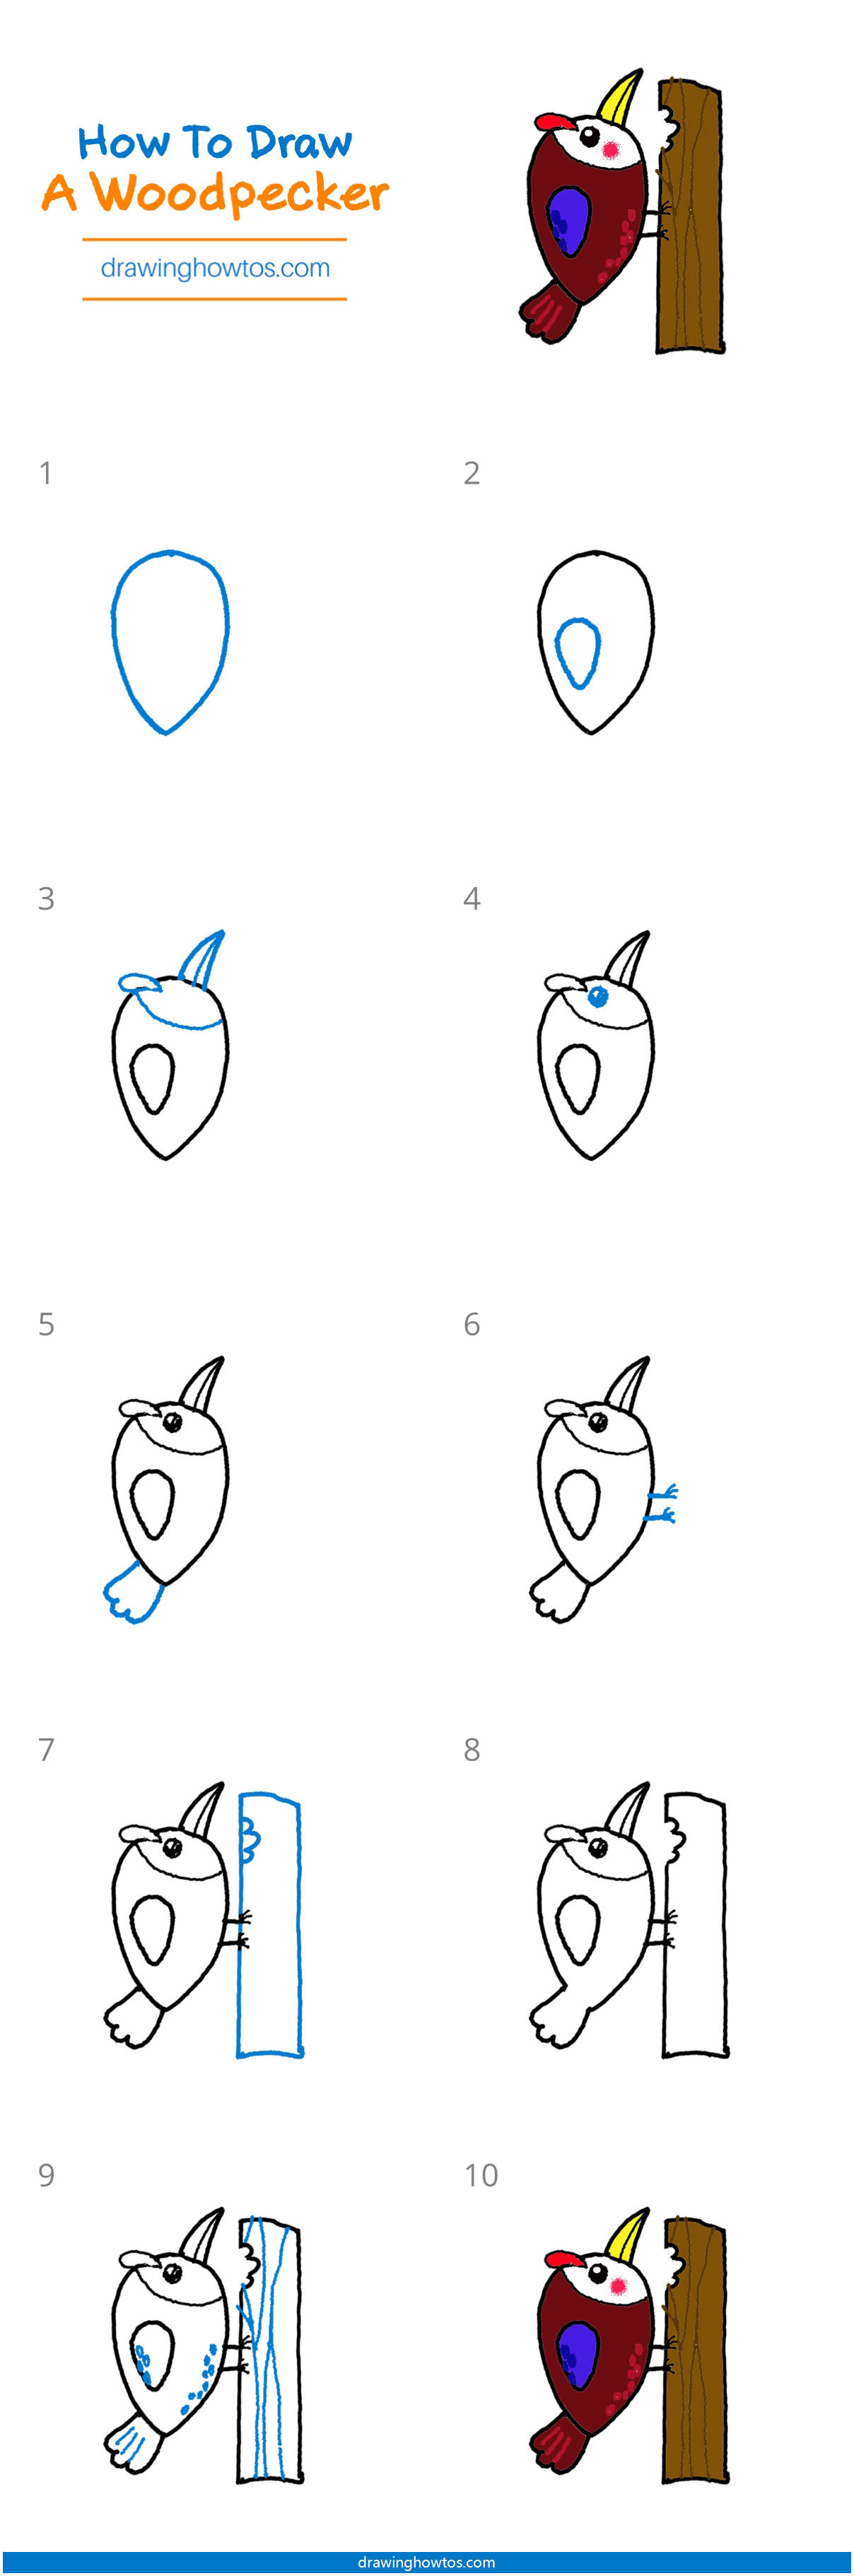 How to Draw a Woodpecker Step by Step